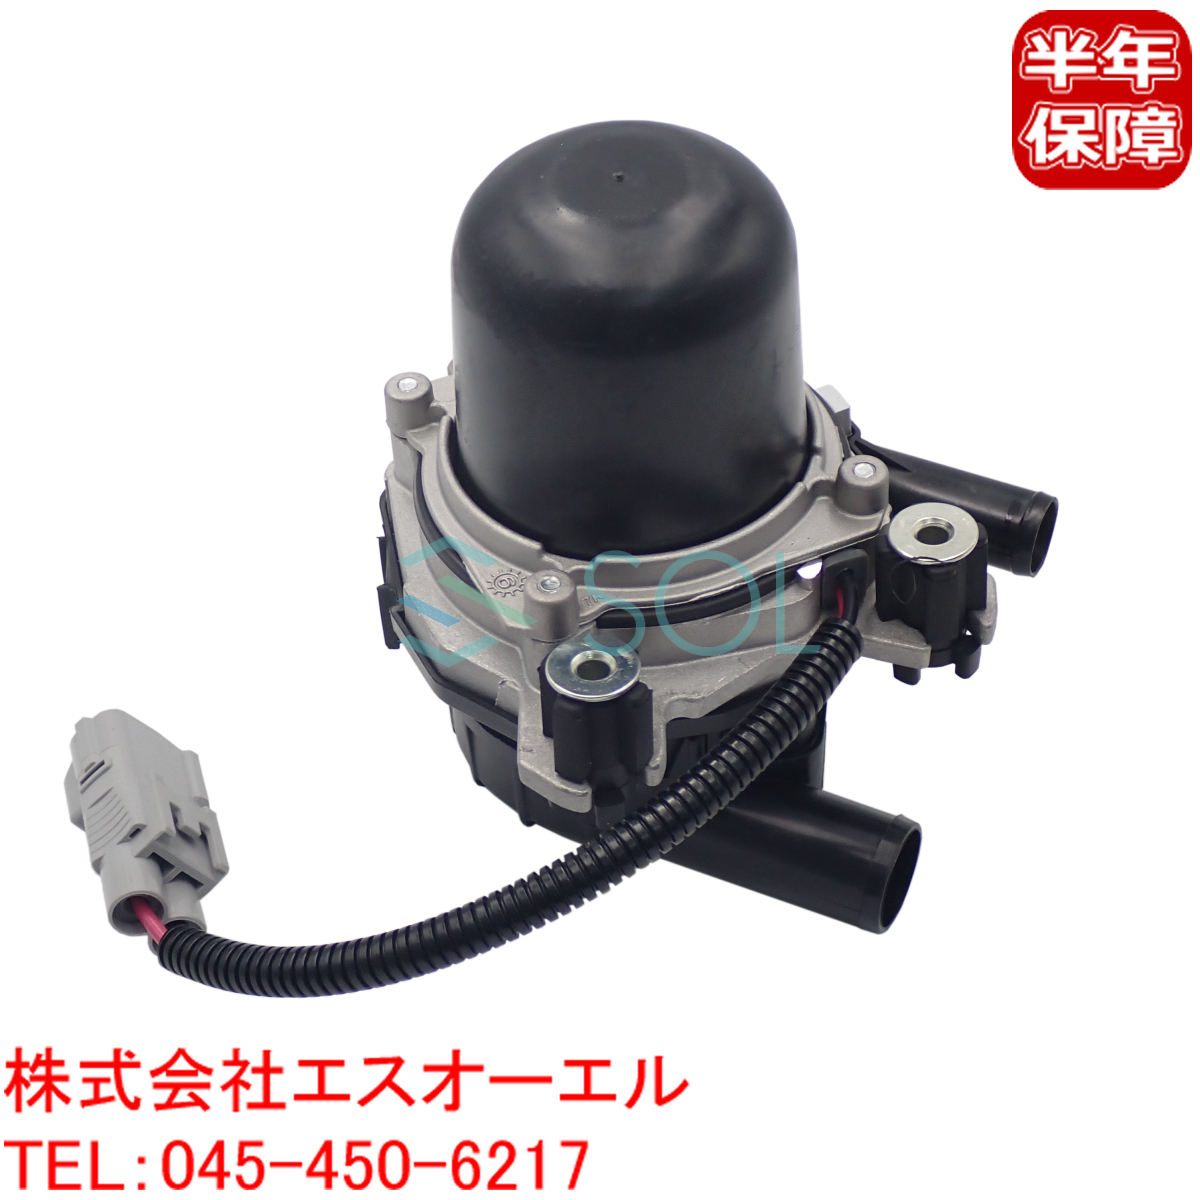  Toyota Dyna Toyoace (TRY220 TRY230) Hilux Surf (TRN210W TRN215W) air pump 17610-0C010 shipping deadline 18 hour 